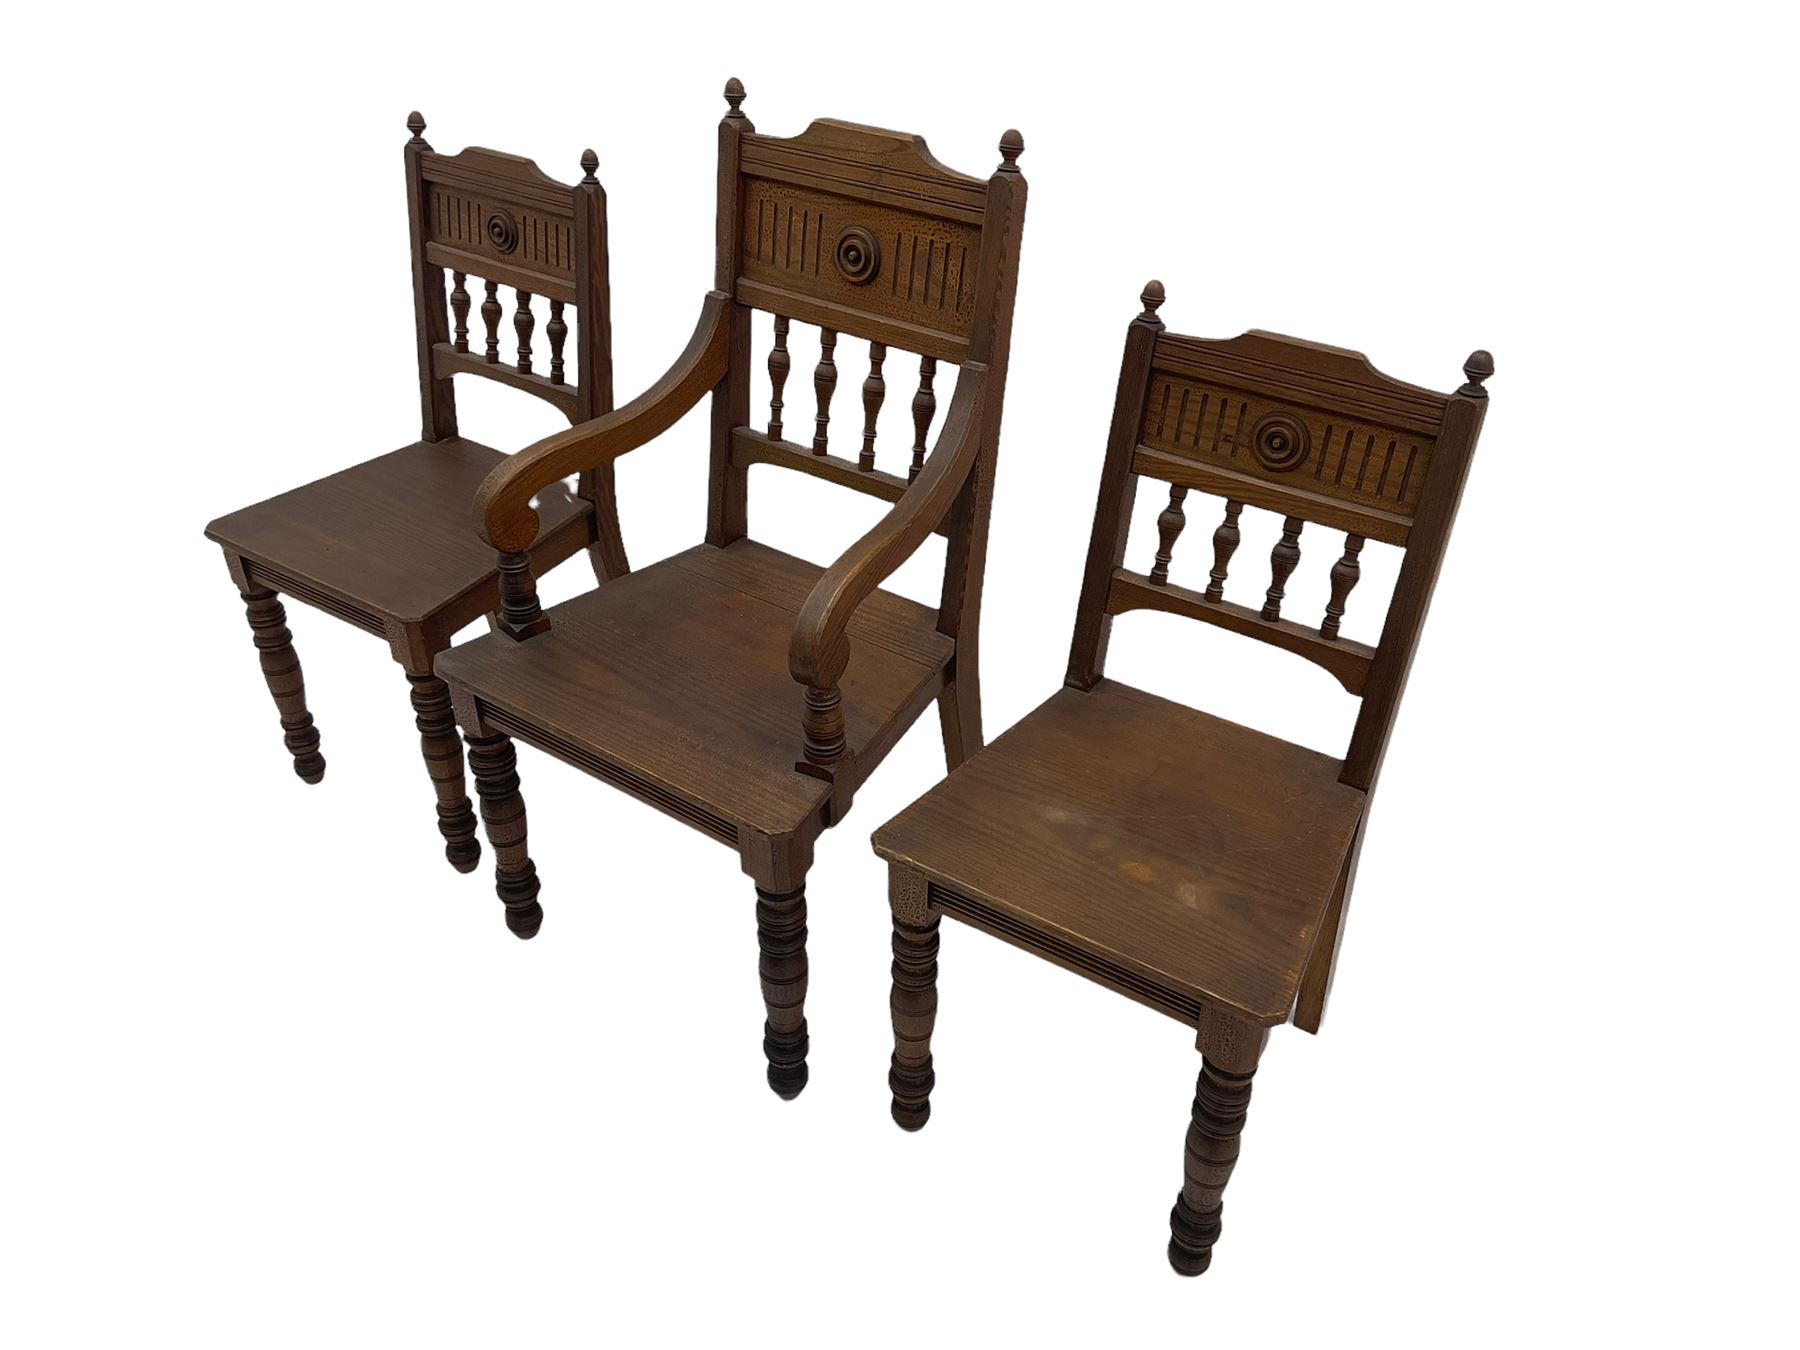 Victorian Gothic revival pitch pine armchair and pair of matching chairs - Image 4 of 7